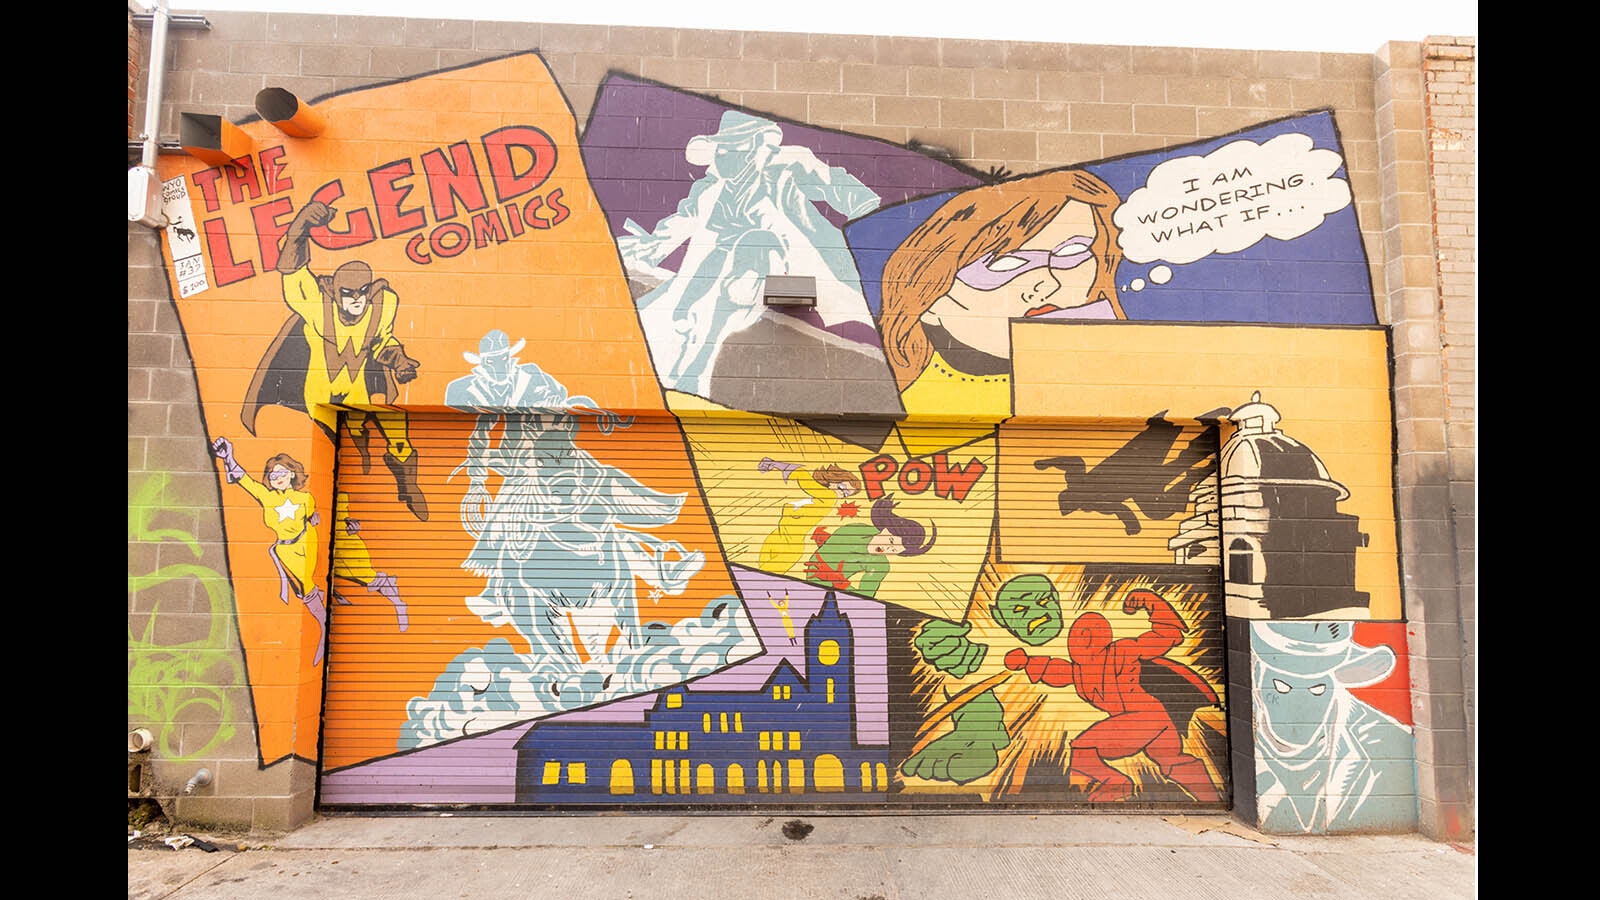 This gallery features some hidden gems found in an alleyway on downtown Cheyenne along Warren and Central avenues behind Sanford's Grub and Pub.